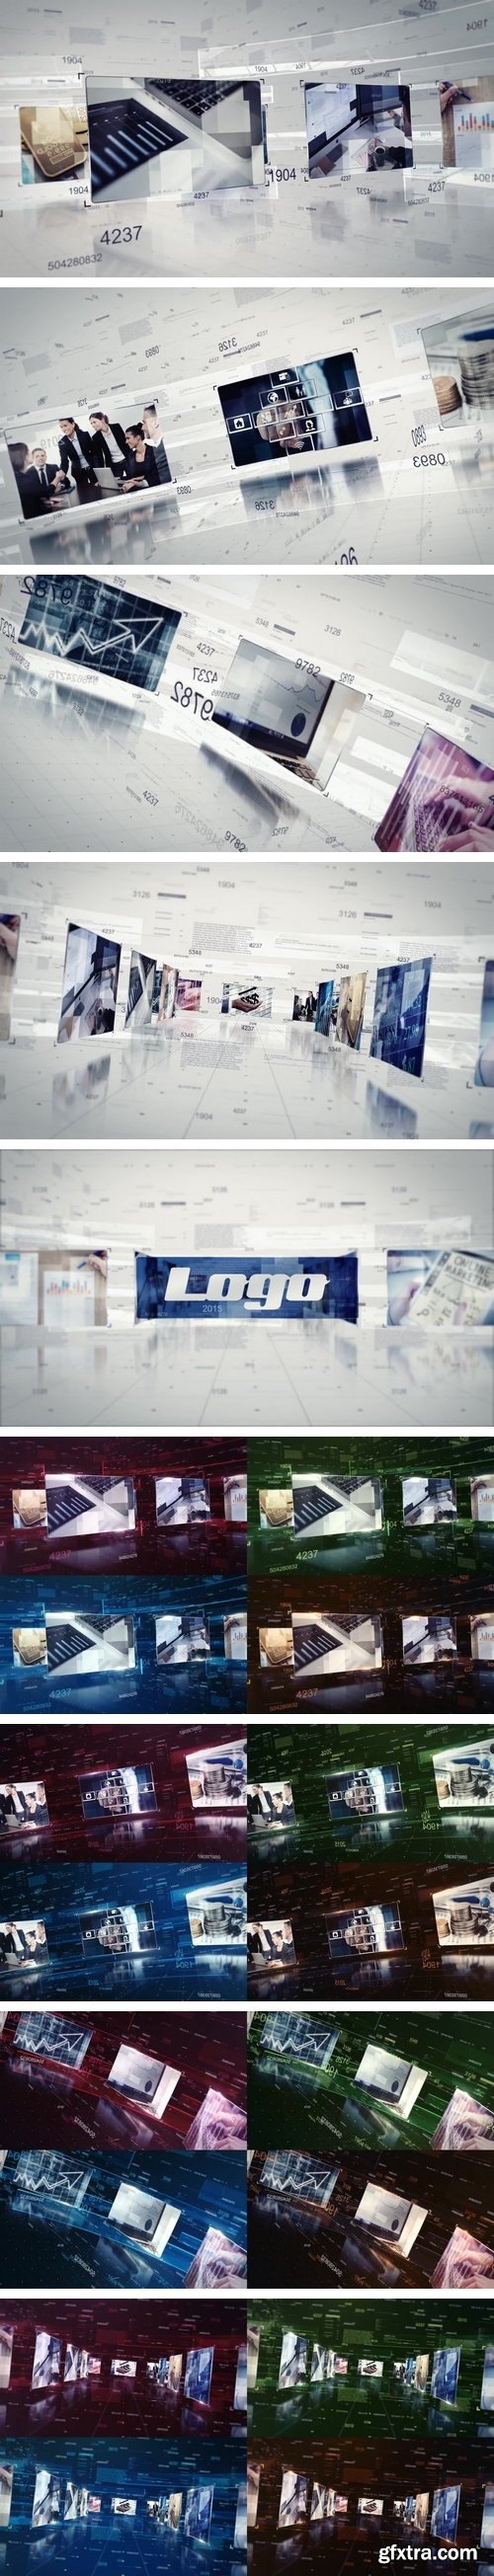 MotionArray - Corporate Intro After Effects Templates 57801